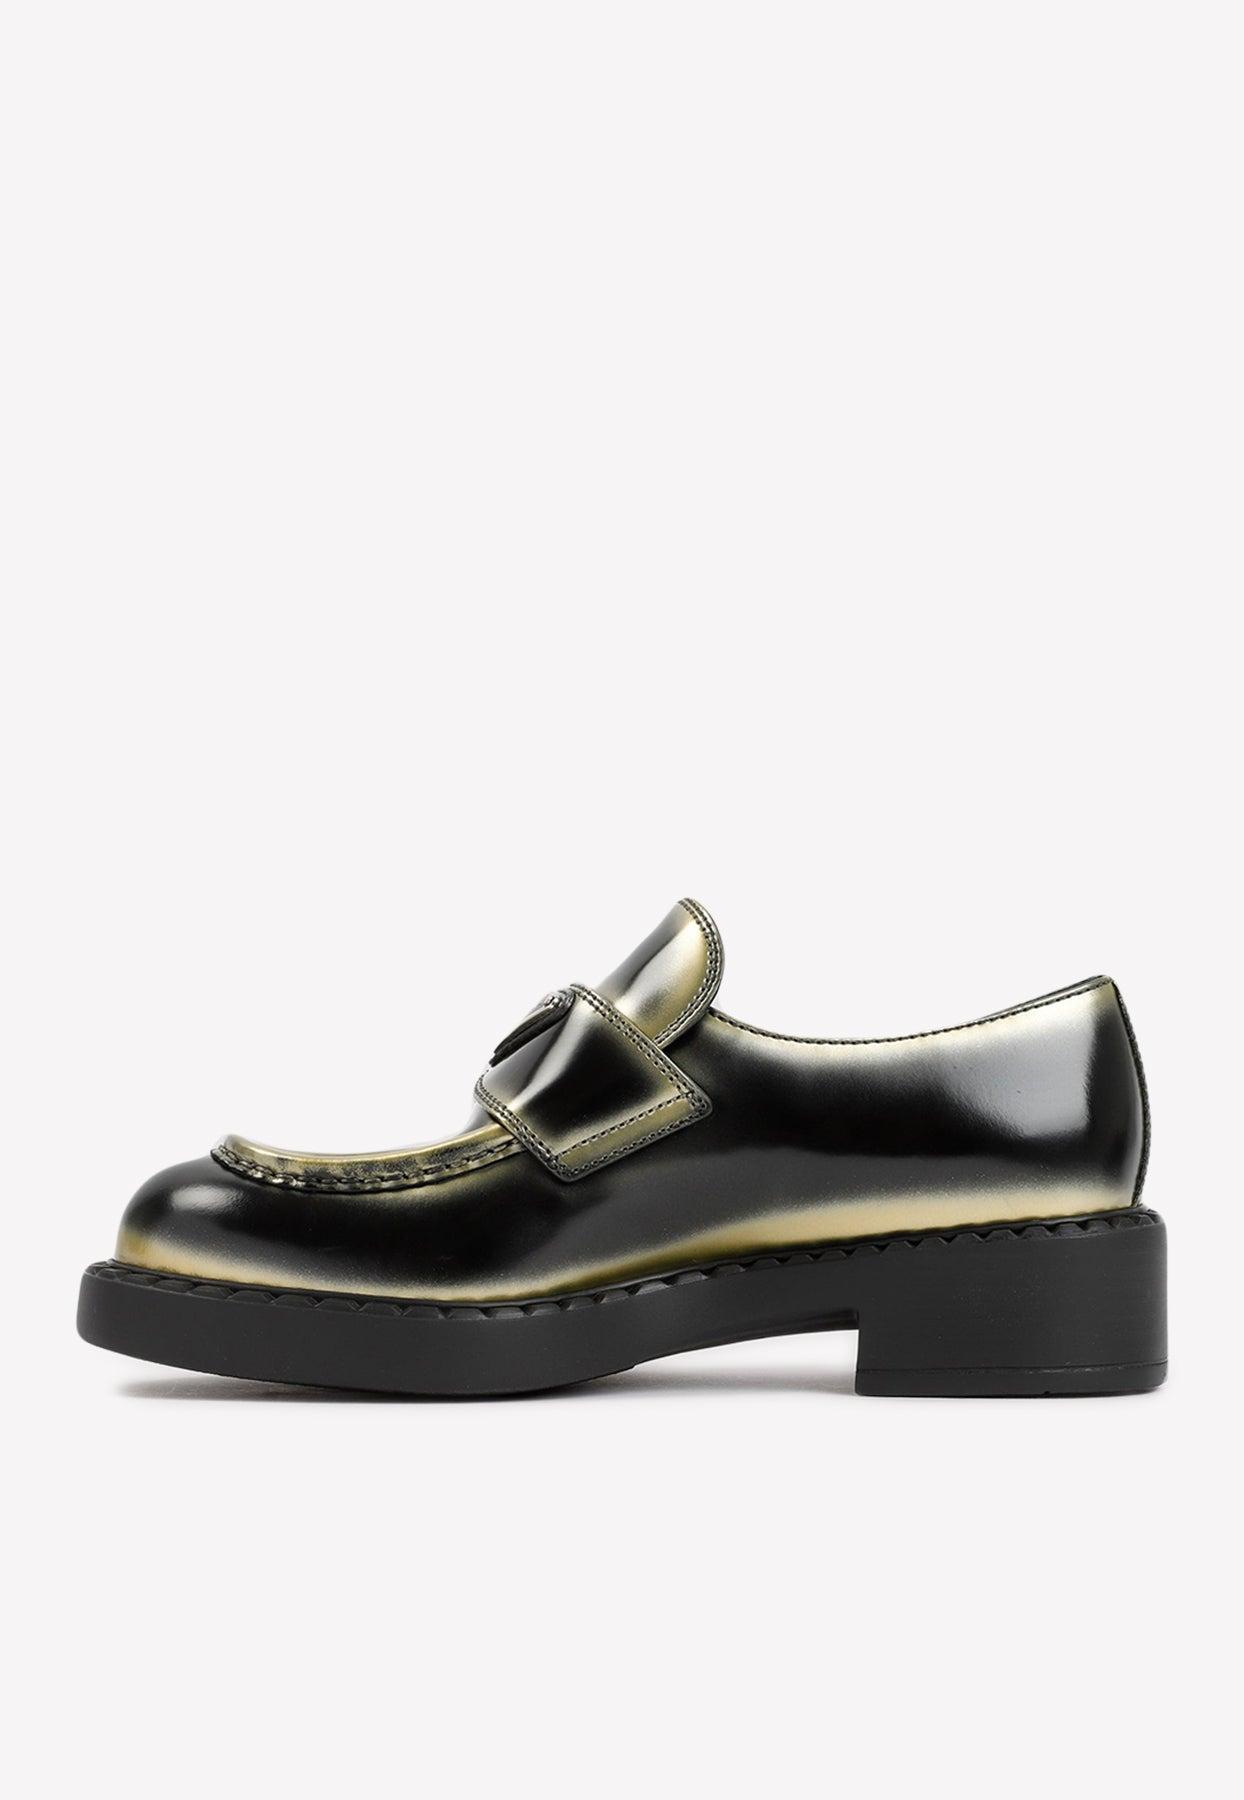 Prada Loafers Shoes in Black | Lyst